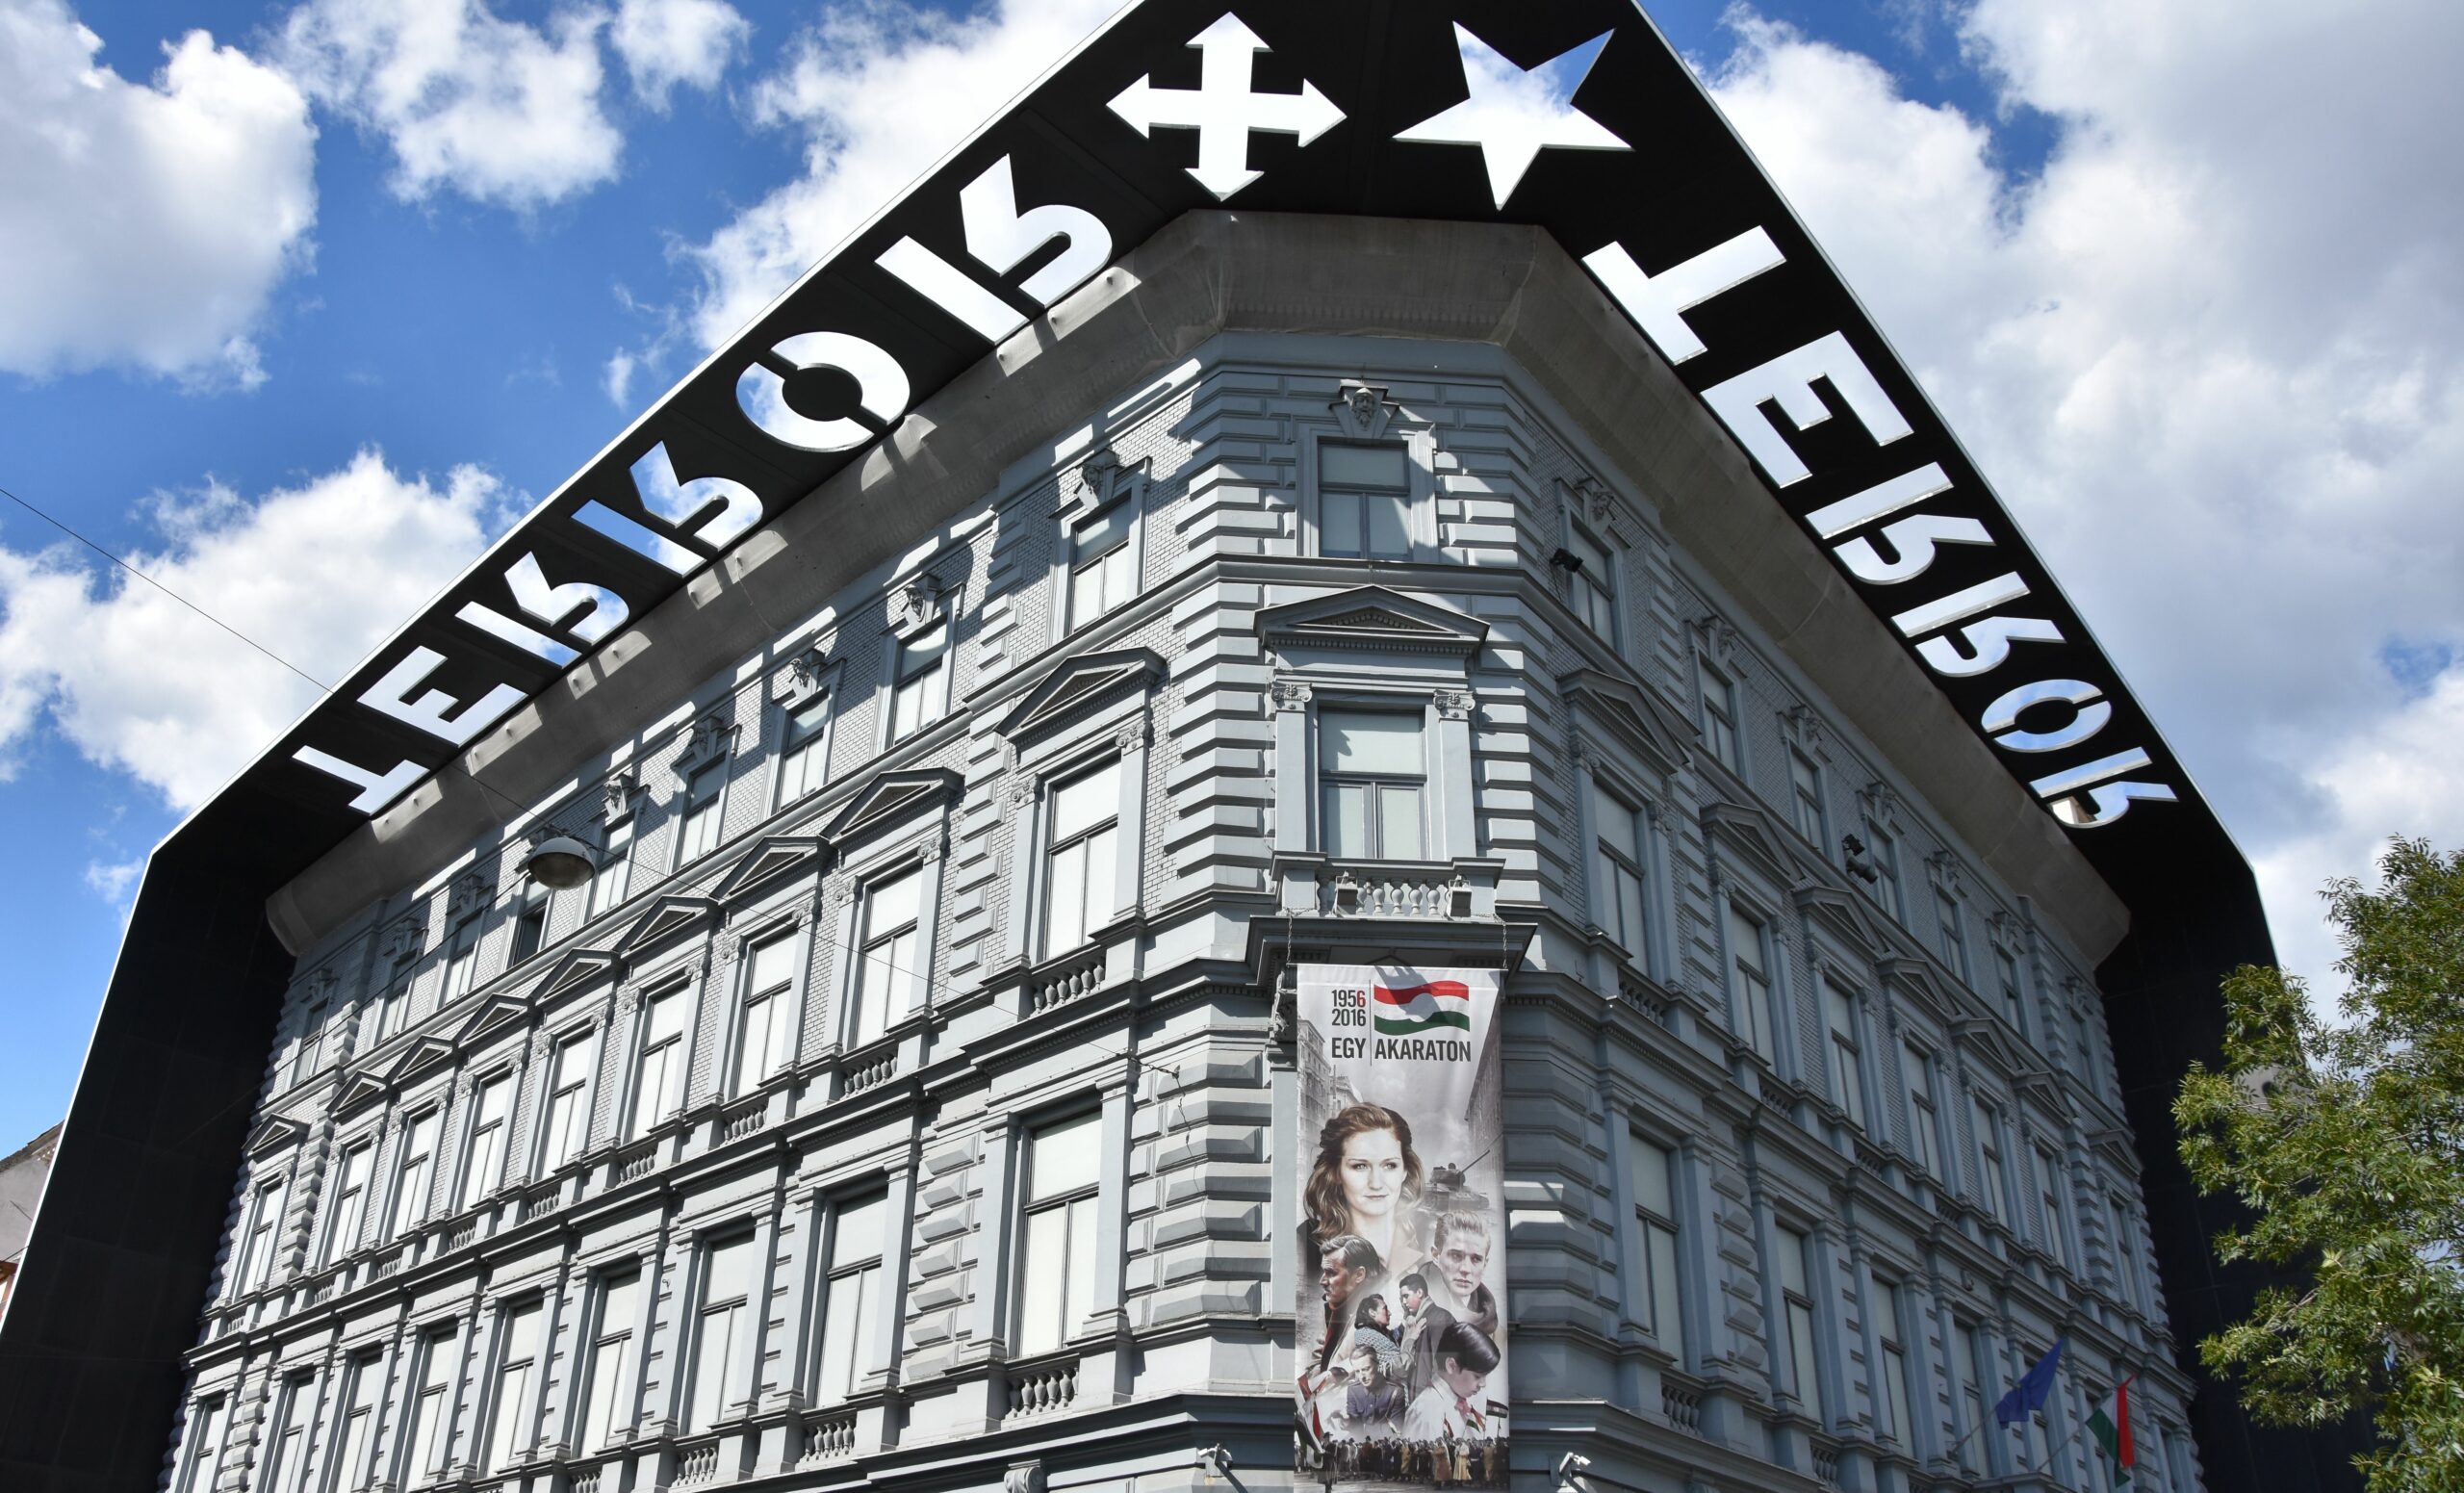 The exterior of House of Terror on Andrássy Street, Budapest